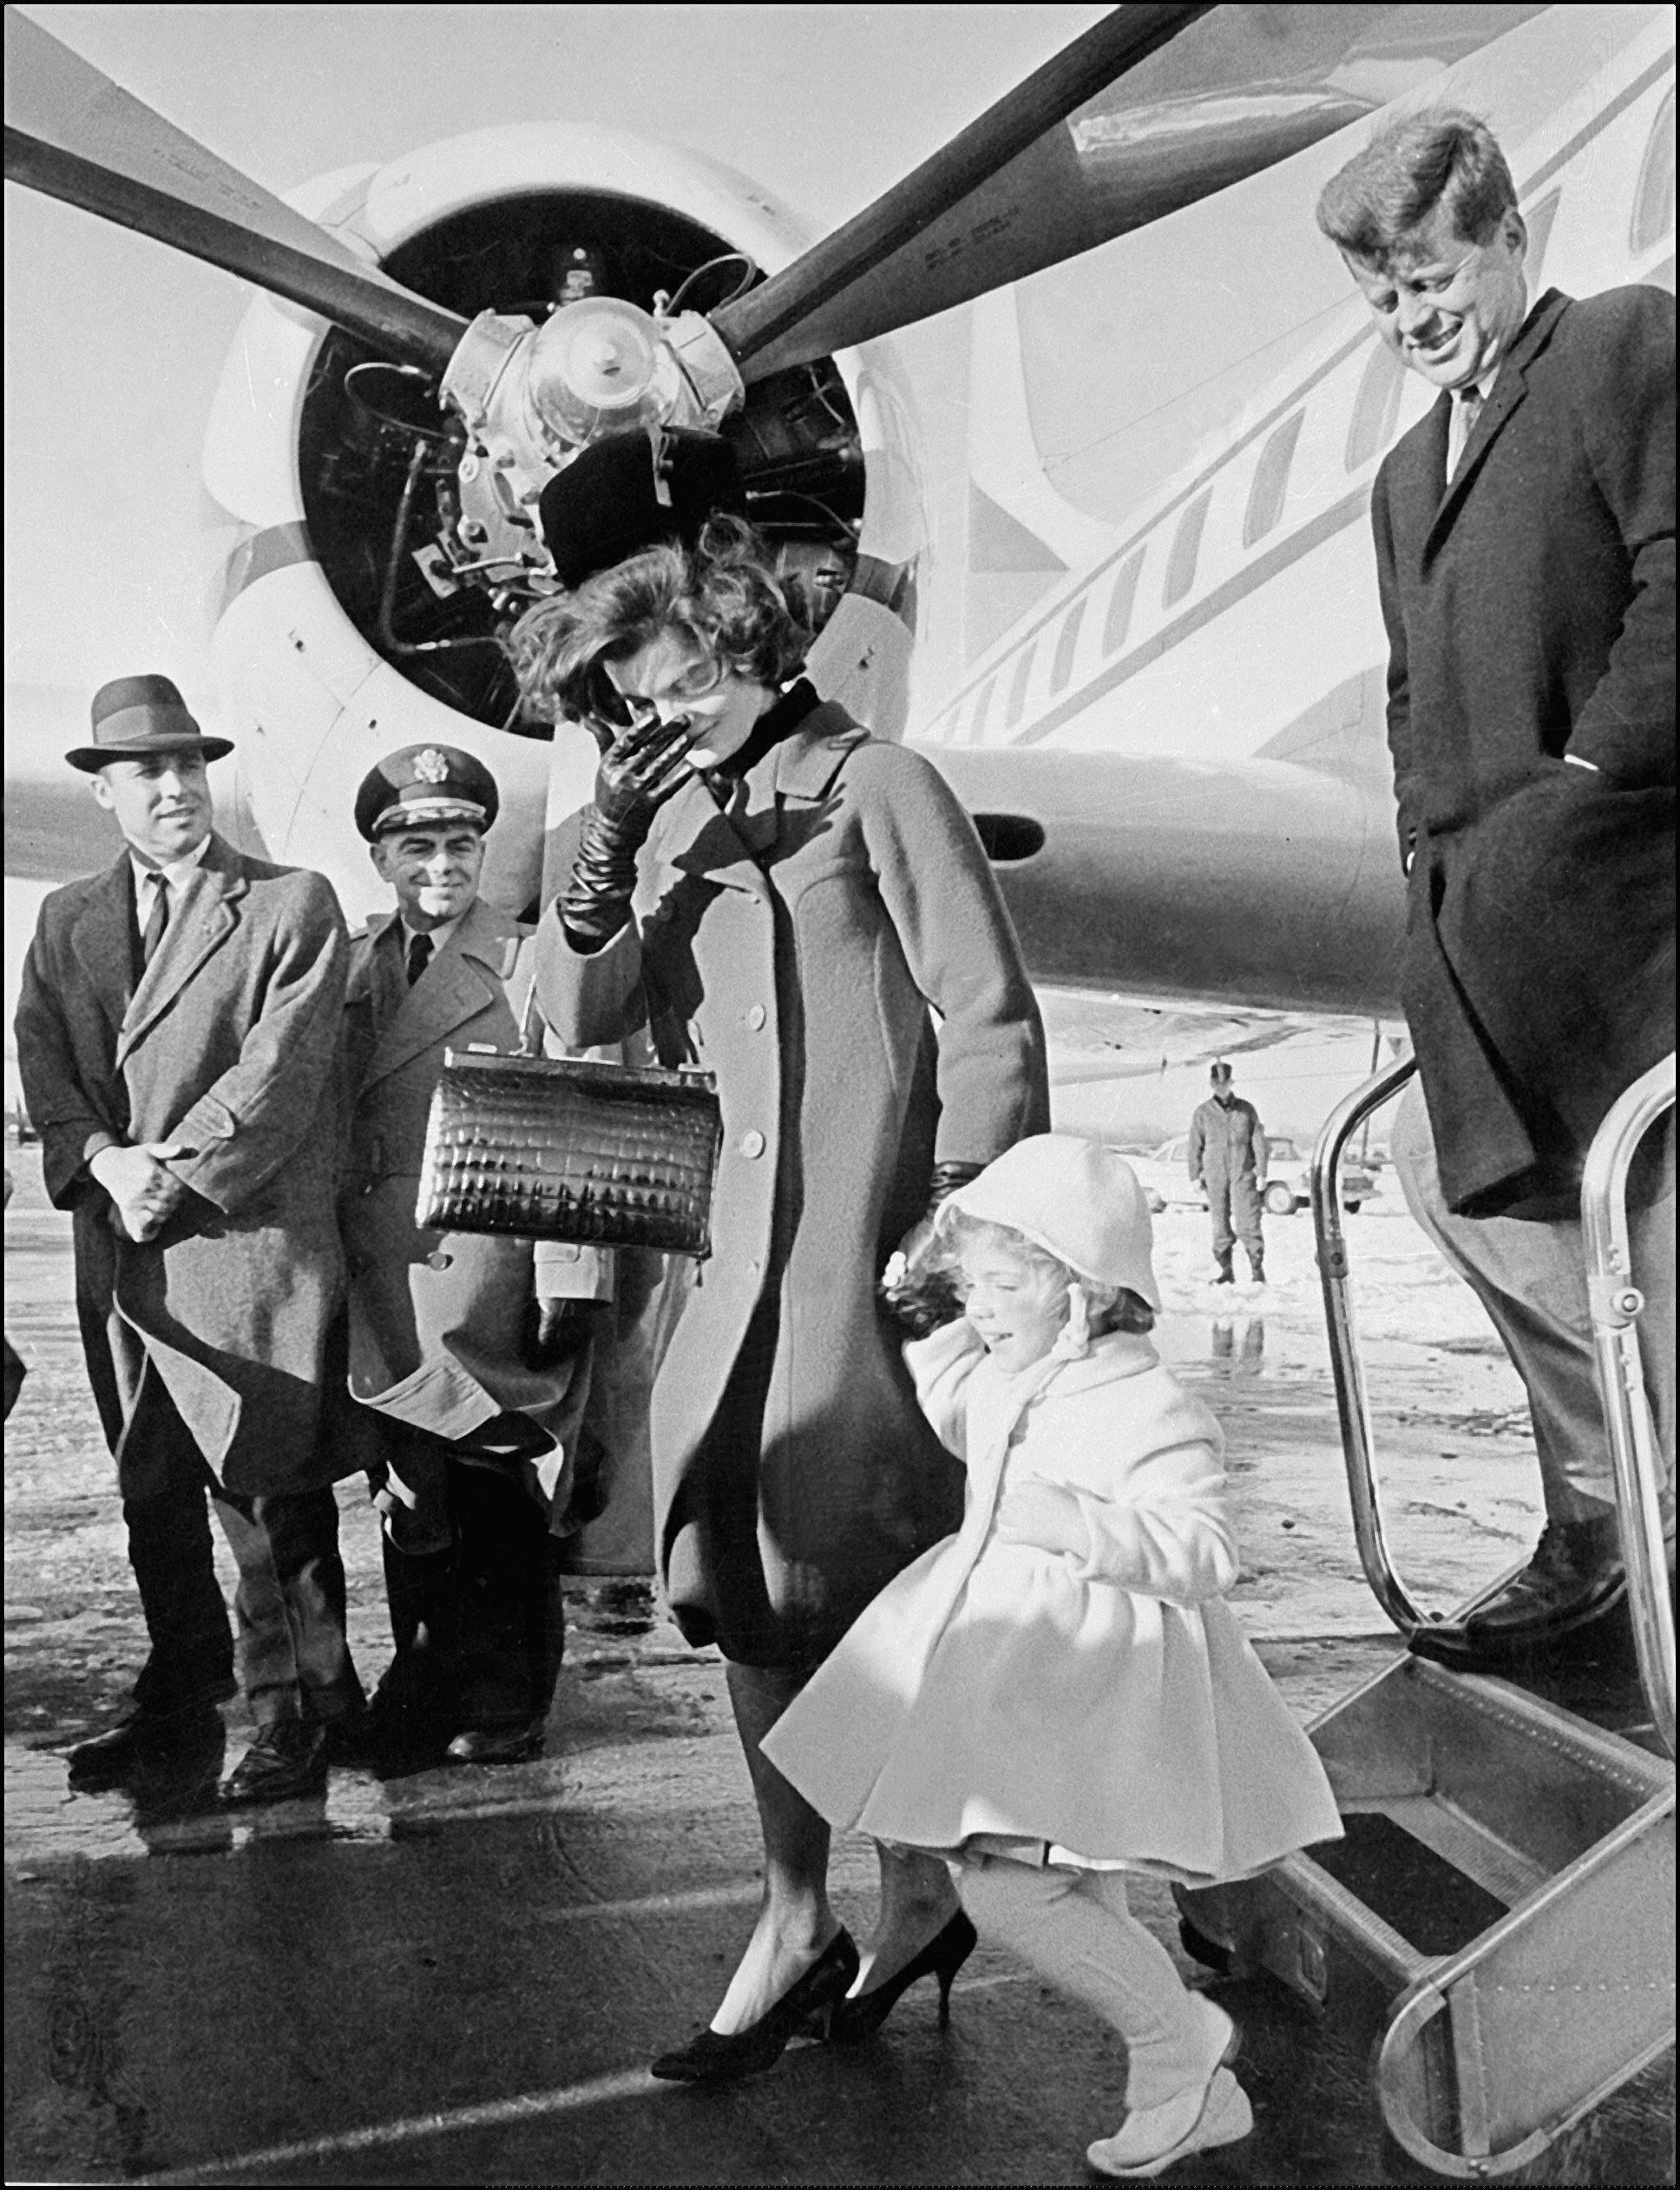 John Fitzgerald Kennedy, his wife Jacqueline, and their daughter Caroline arriving at an airport